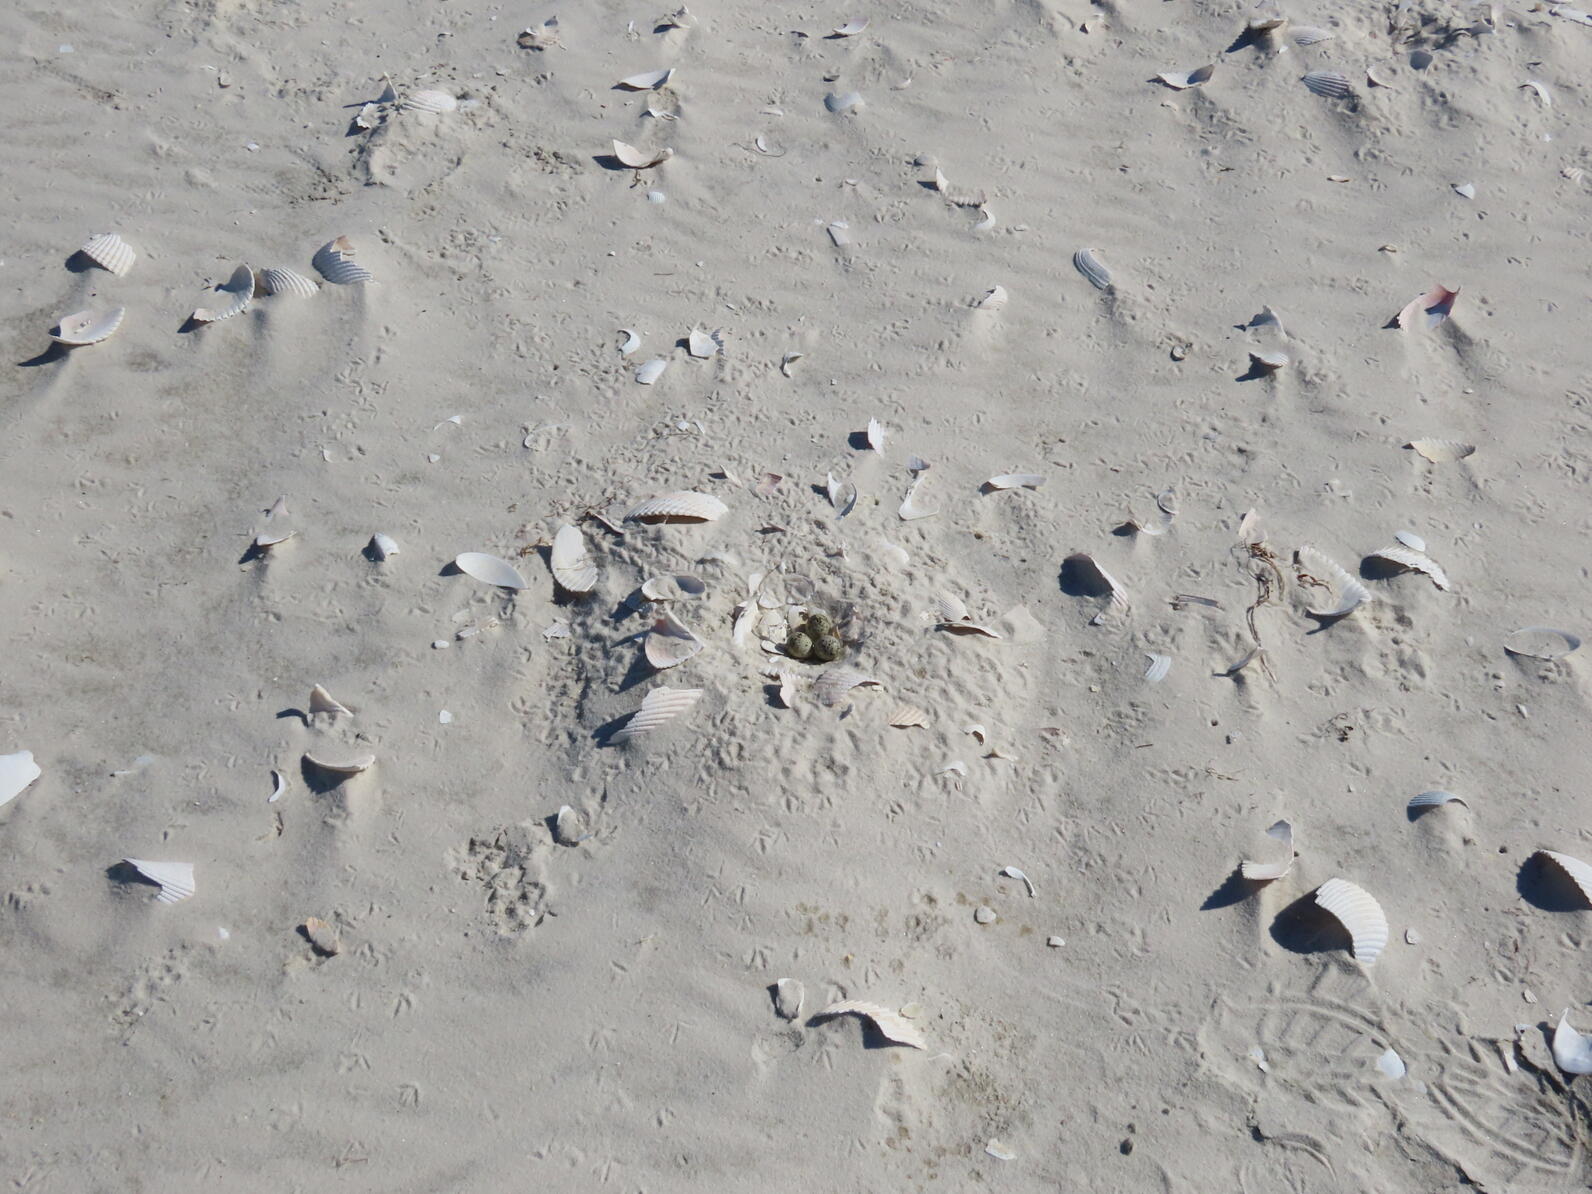 Snowy Plover eggs in a scoop nest in the sand.